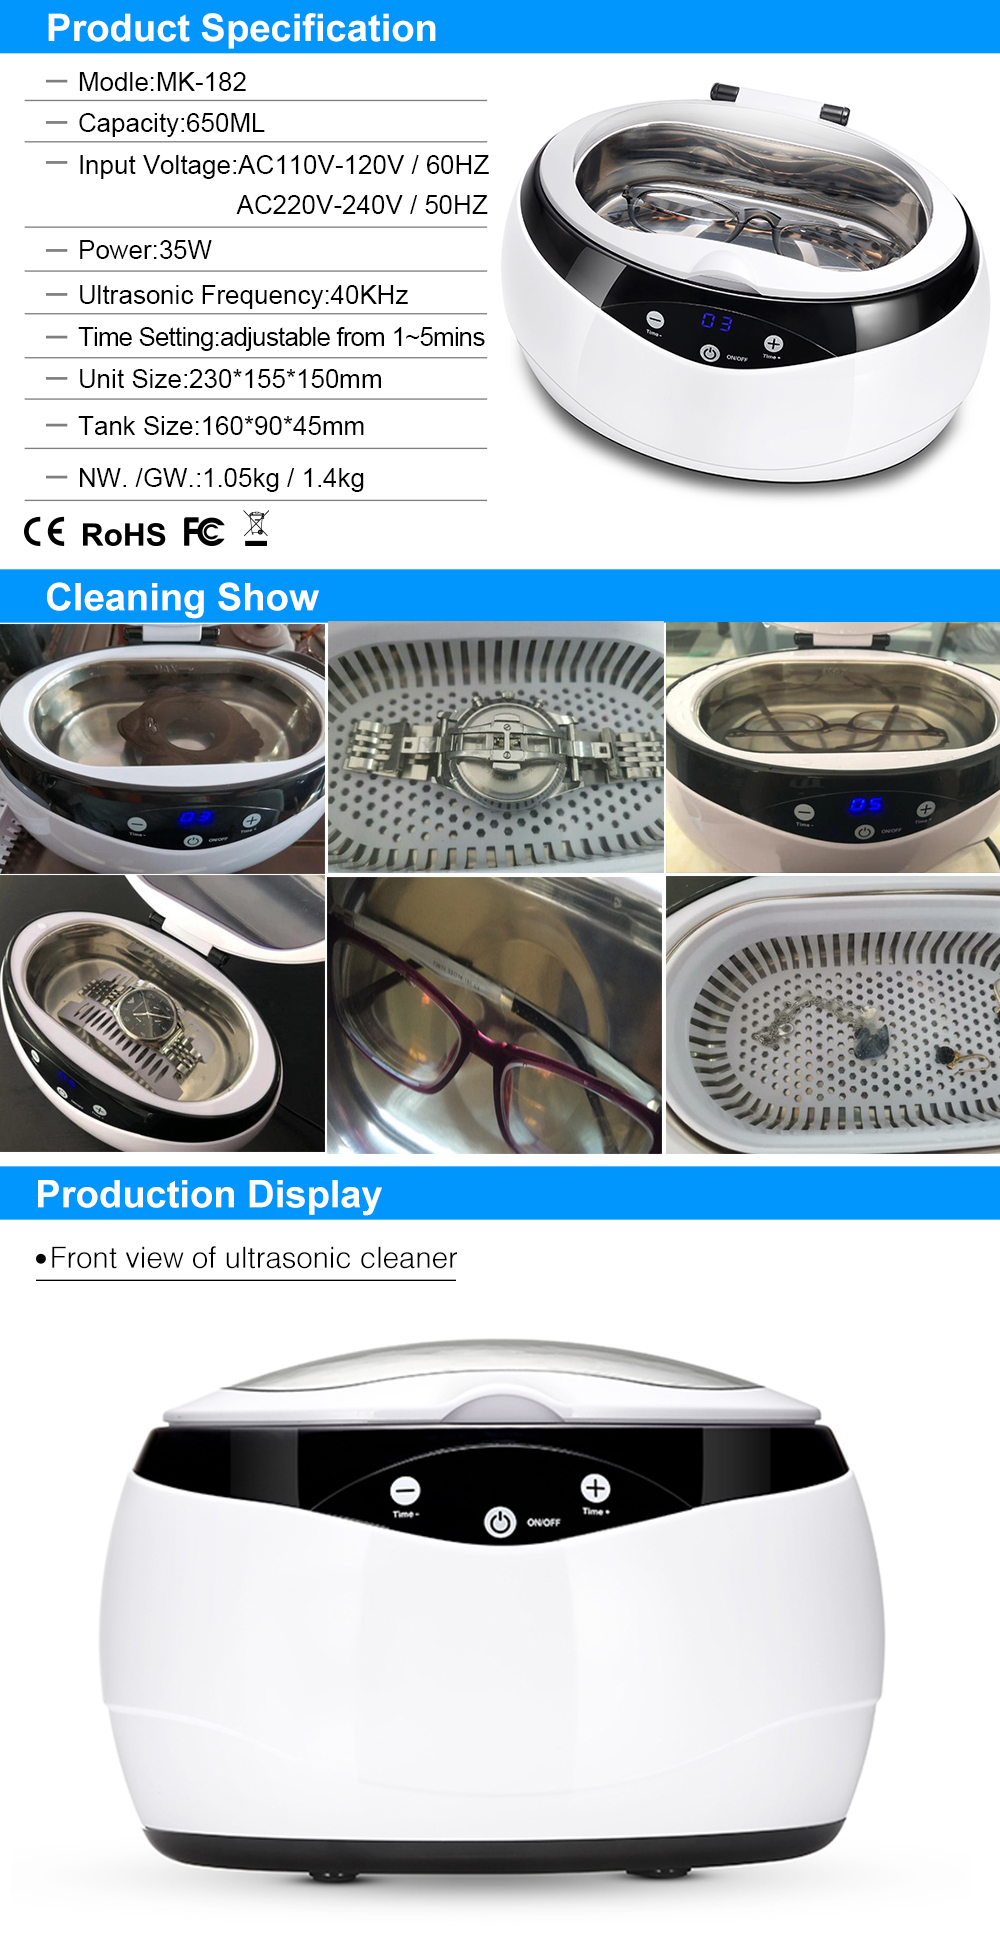 GRANBO Ultrasonic Cleaner, Professional Ultrasonic Jewelry Cleaner with Timer, Portable Household Ultrasonic Cleaning Machine, Electronics Eyeglasses Watch Ring Diamond Retainer Denture Clean